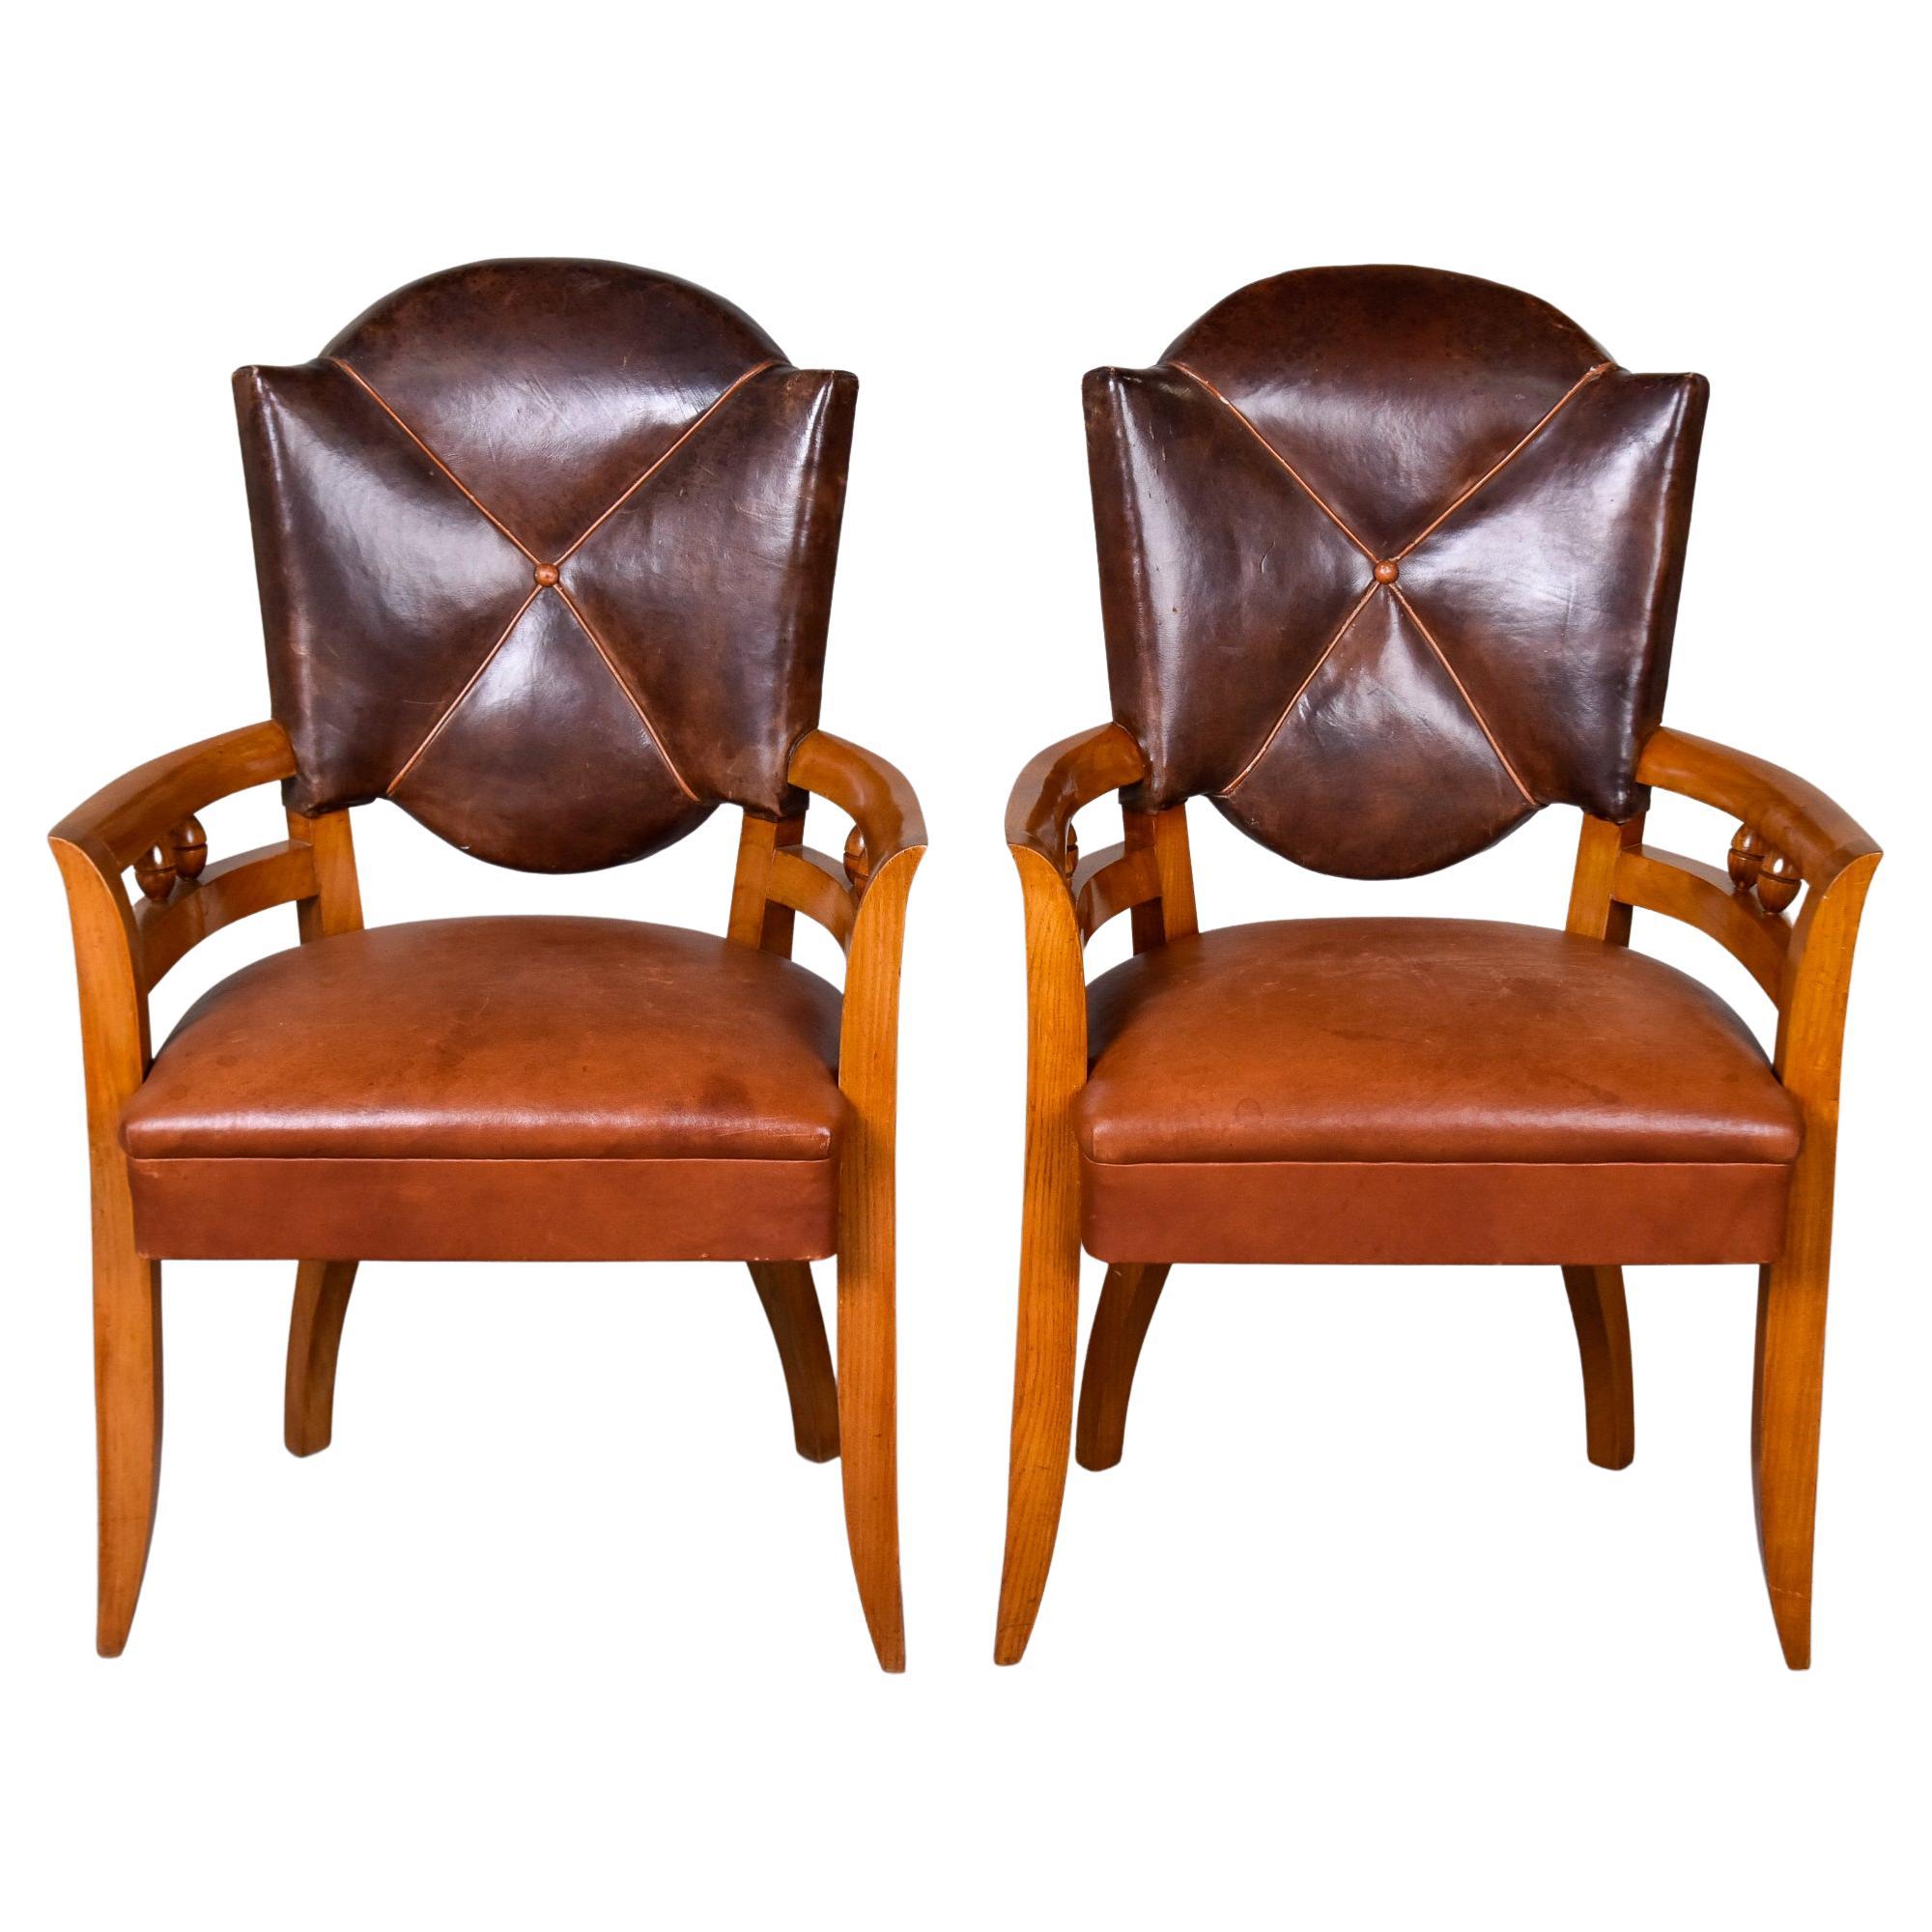 Pair of Early 20th Century Spanish Walnut Barley Twist Chairs with ...